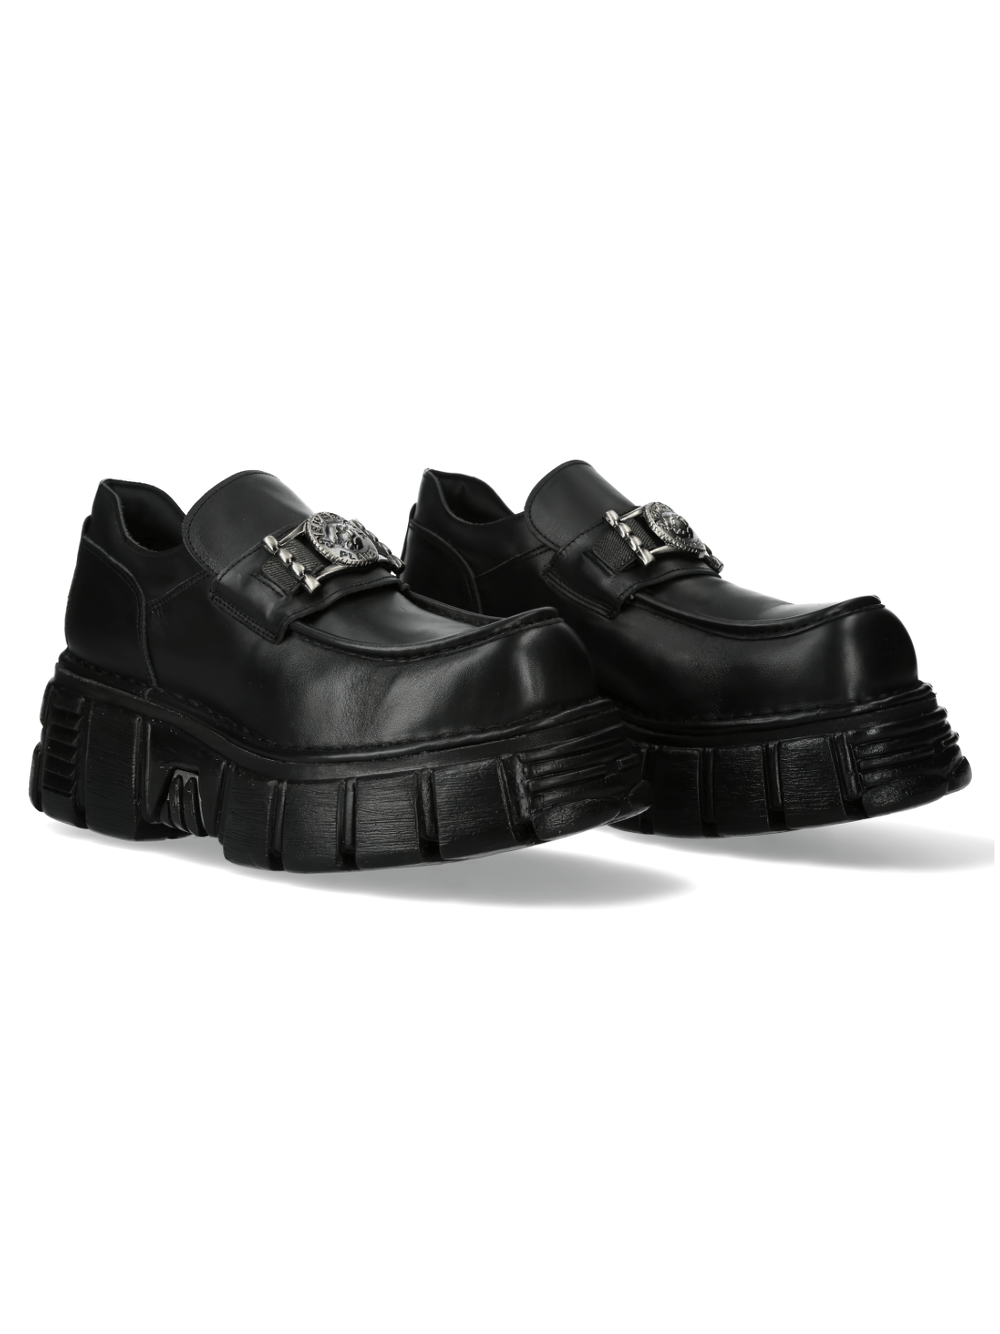 NEW ROCK Urban Rock Leather Platform Shoes With Buckle